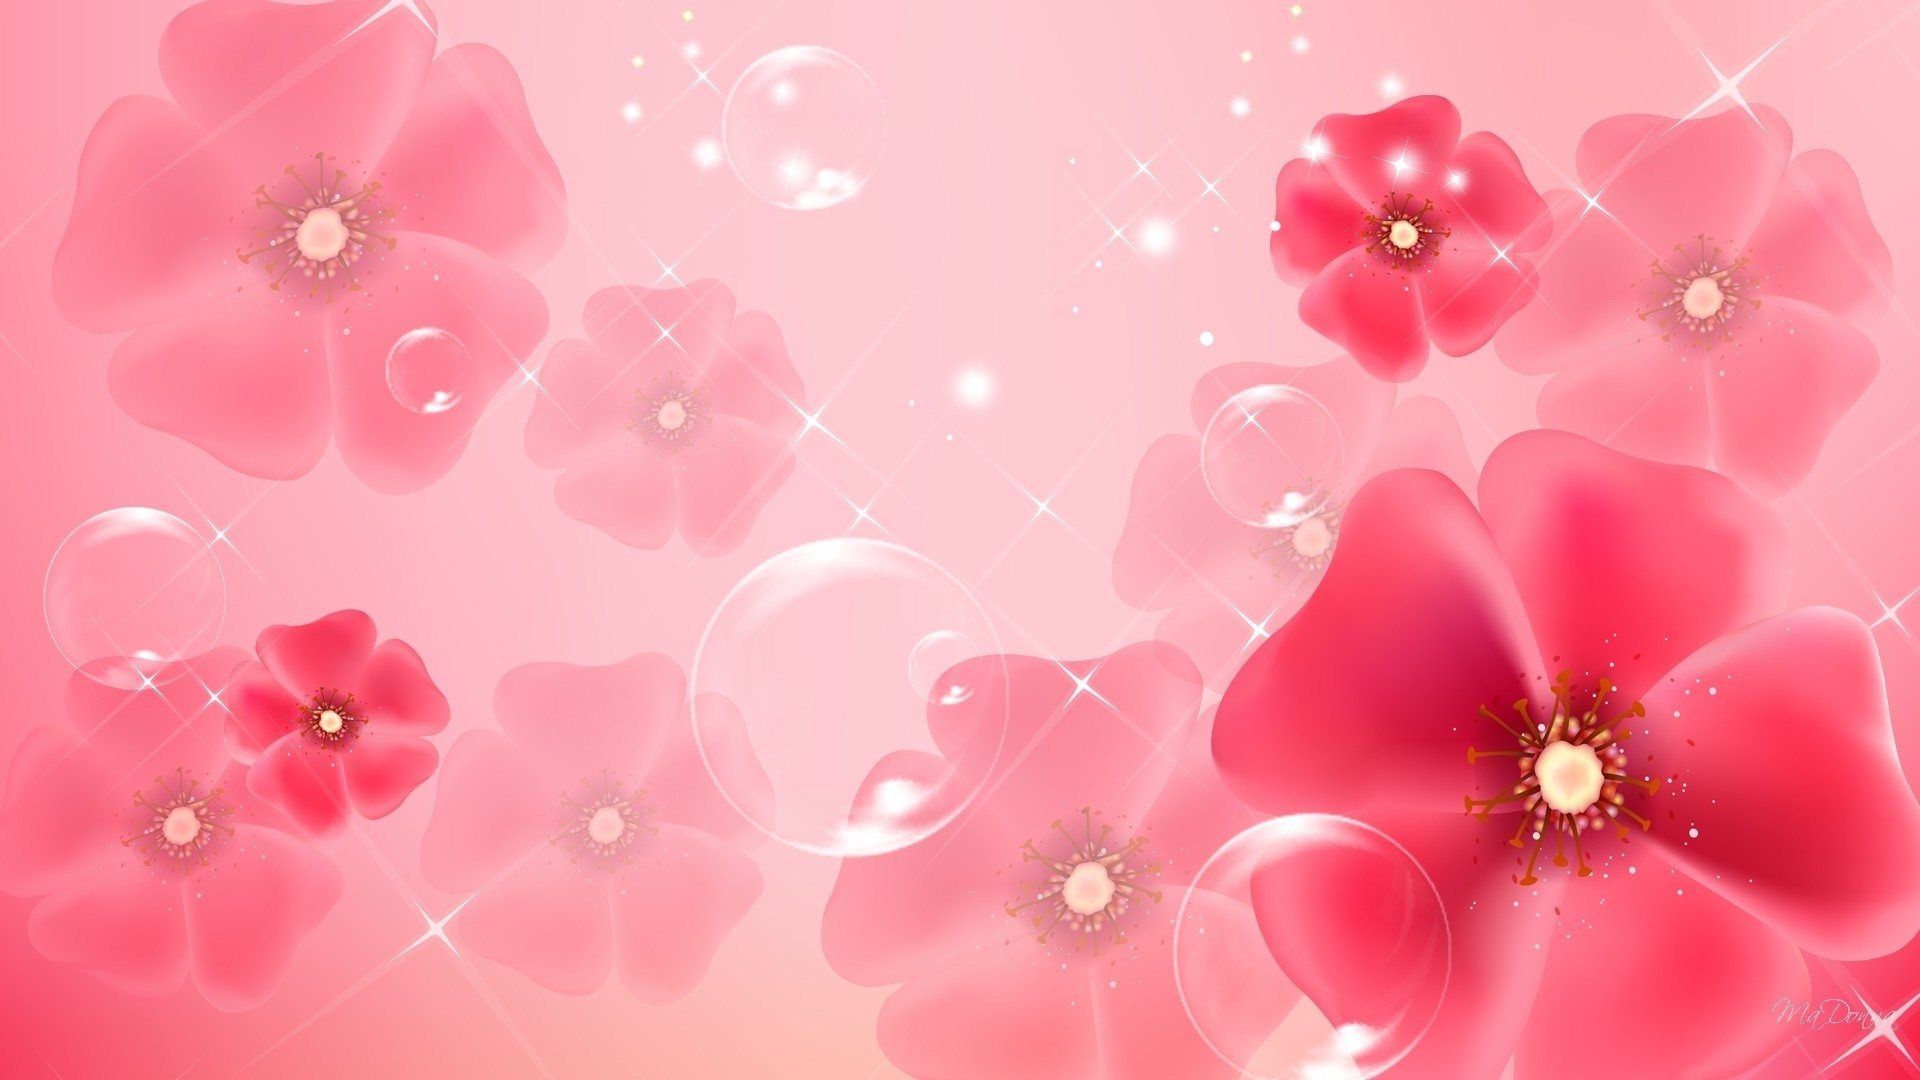 Cute Light Pink Wallpapers Wallpapers